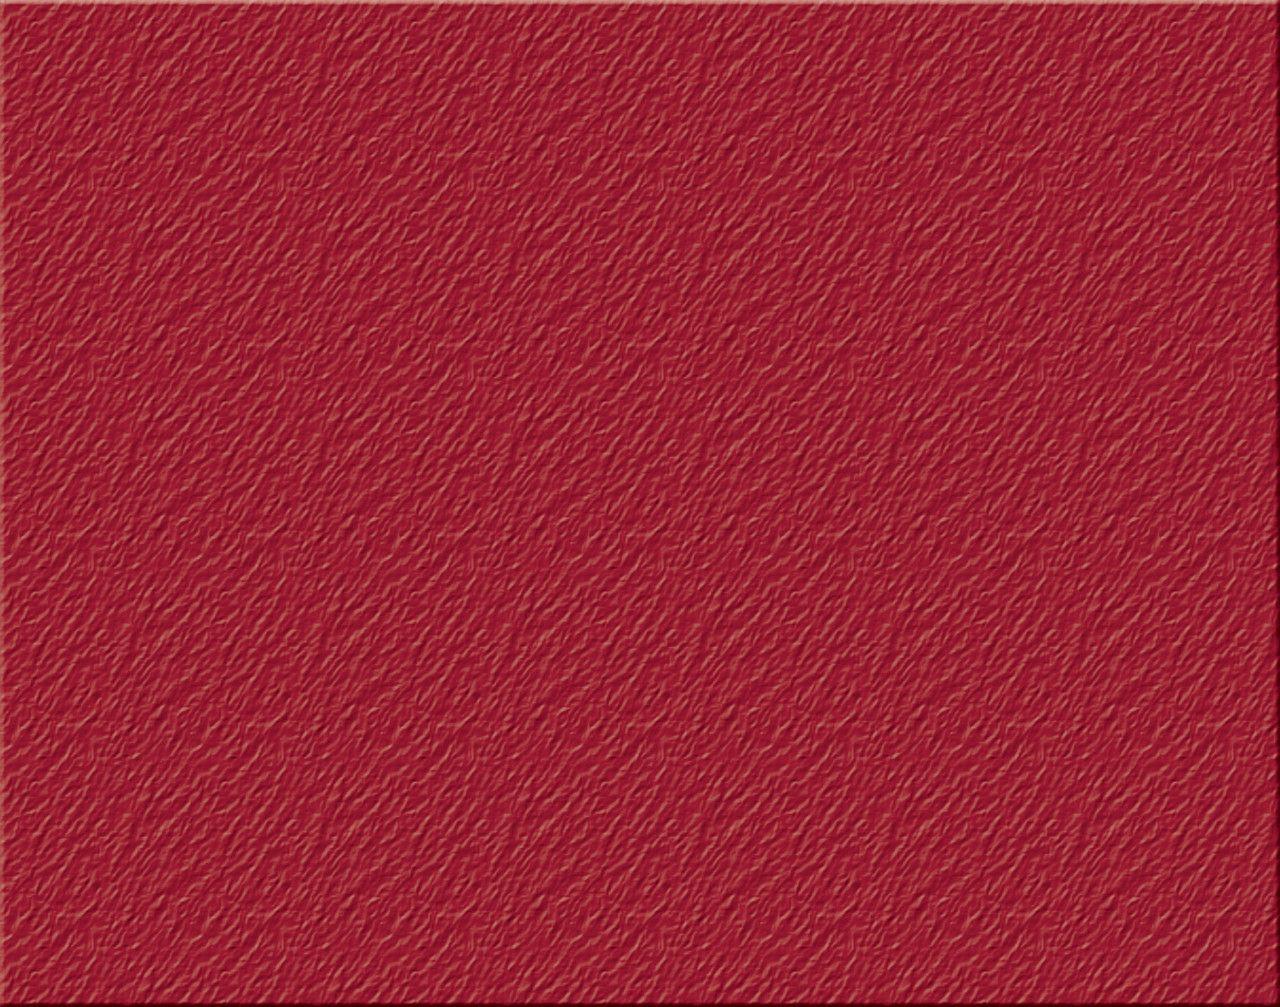 Solid Red Textured 308479 Image HD Wallpapers